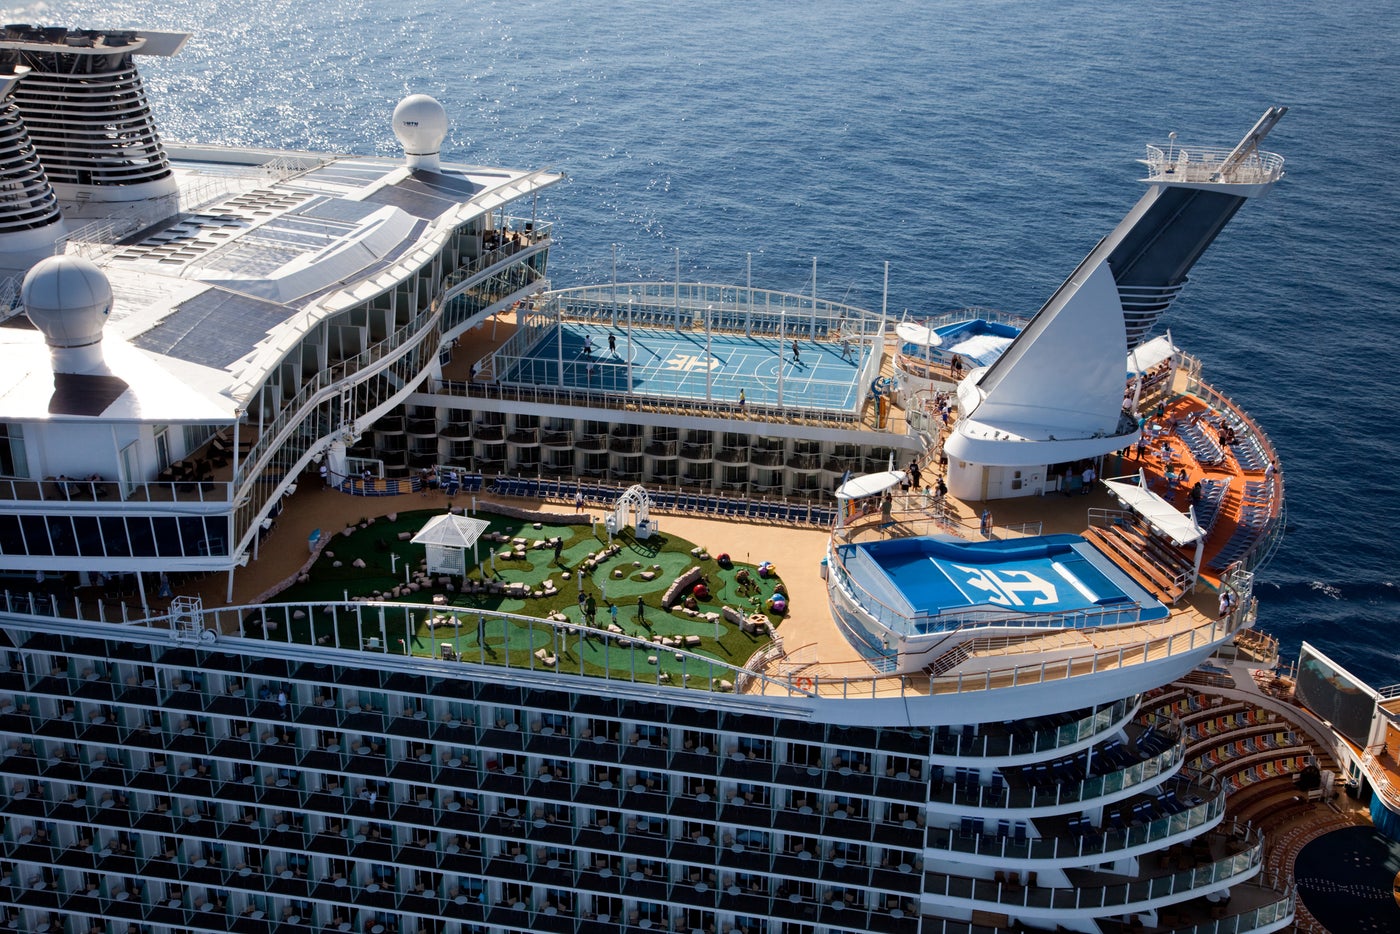 The classes of Royal Caribbean cruise ships, explained